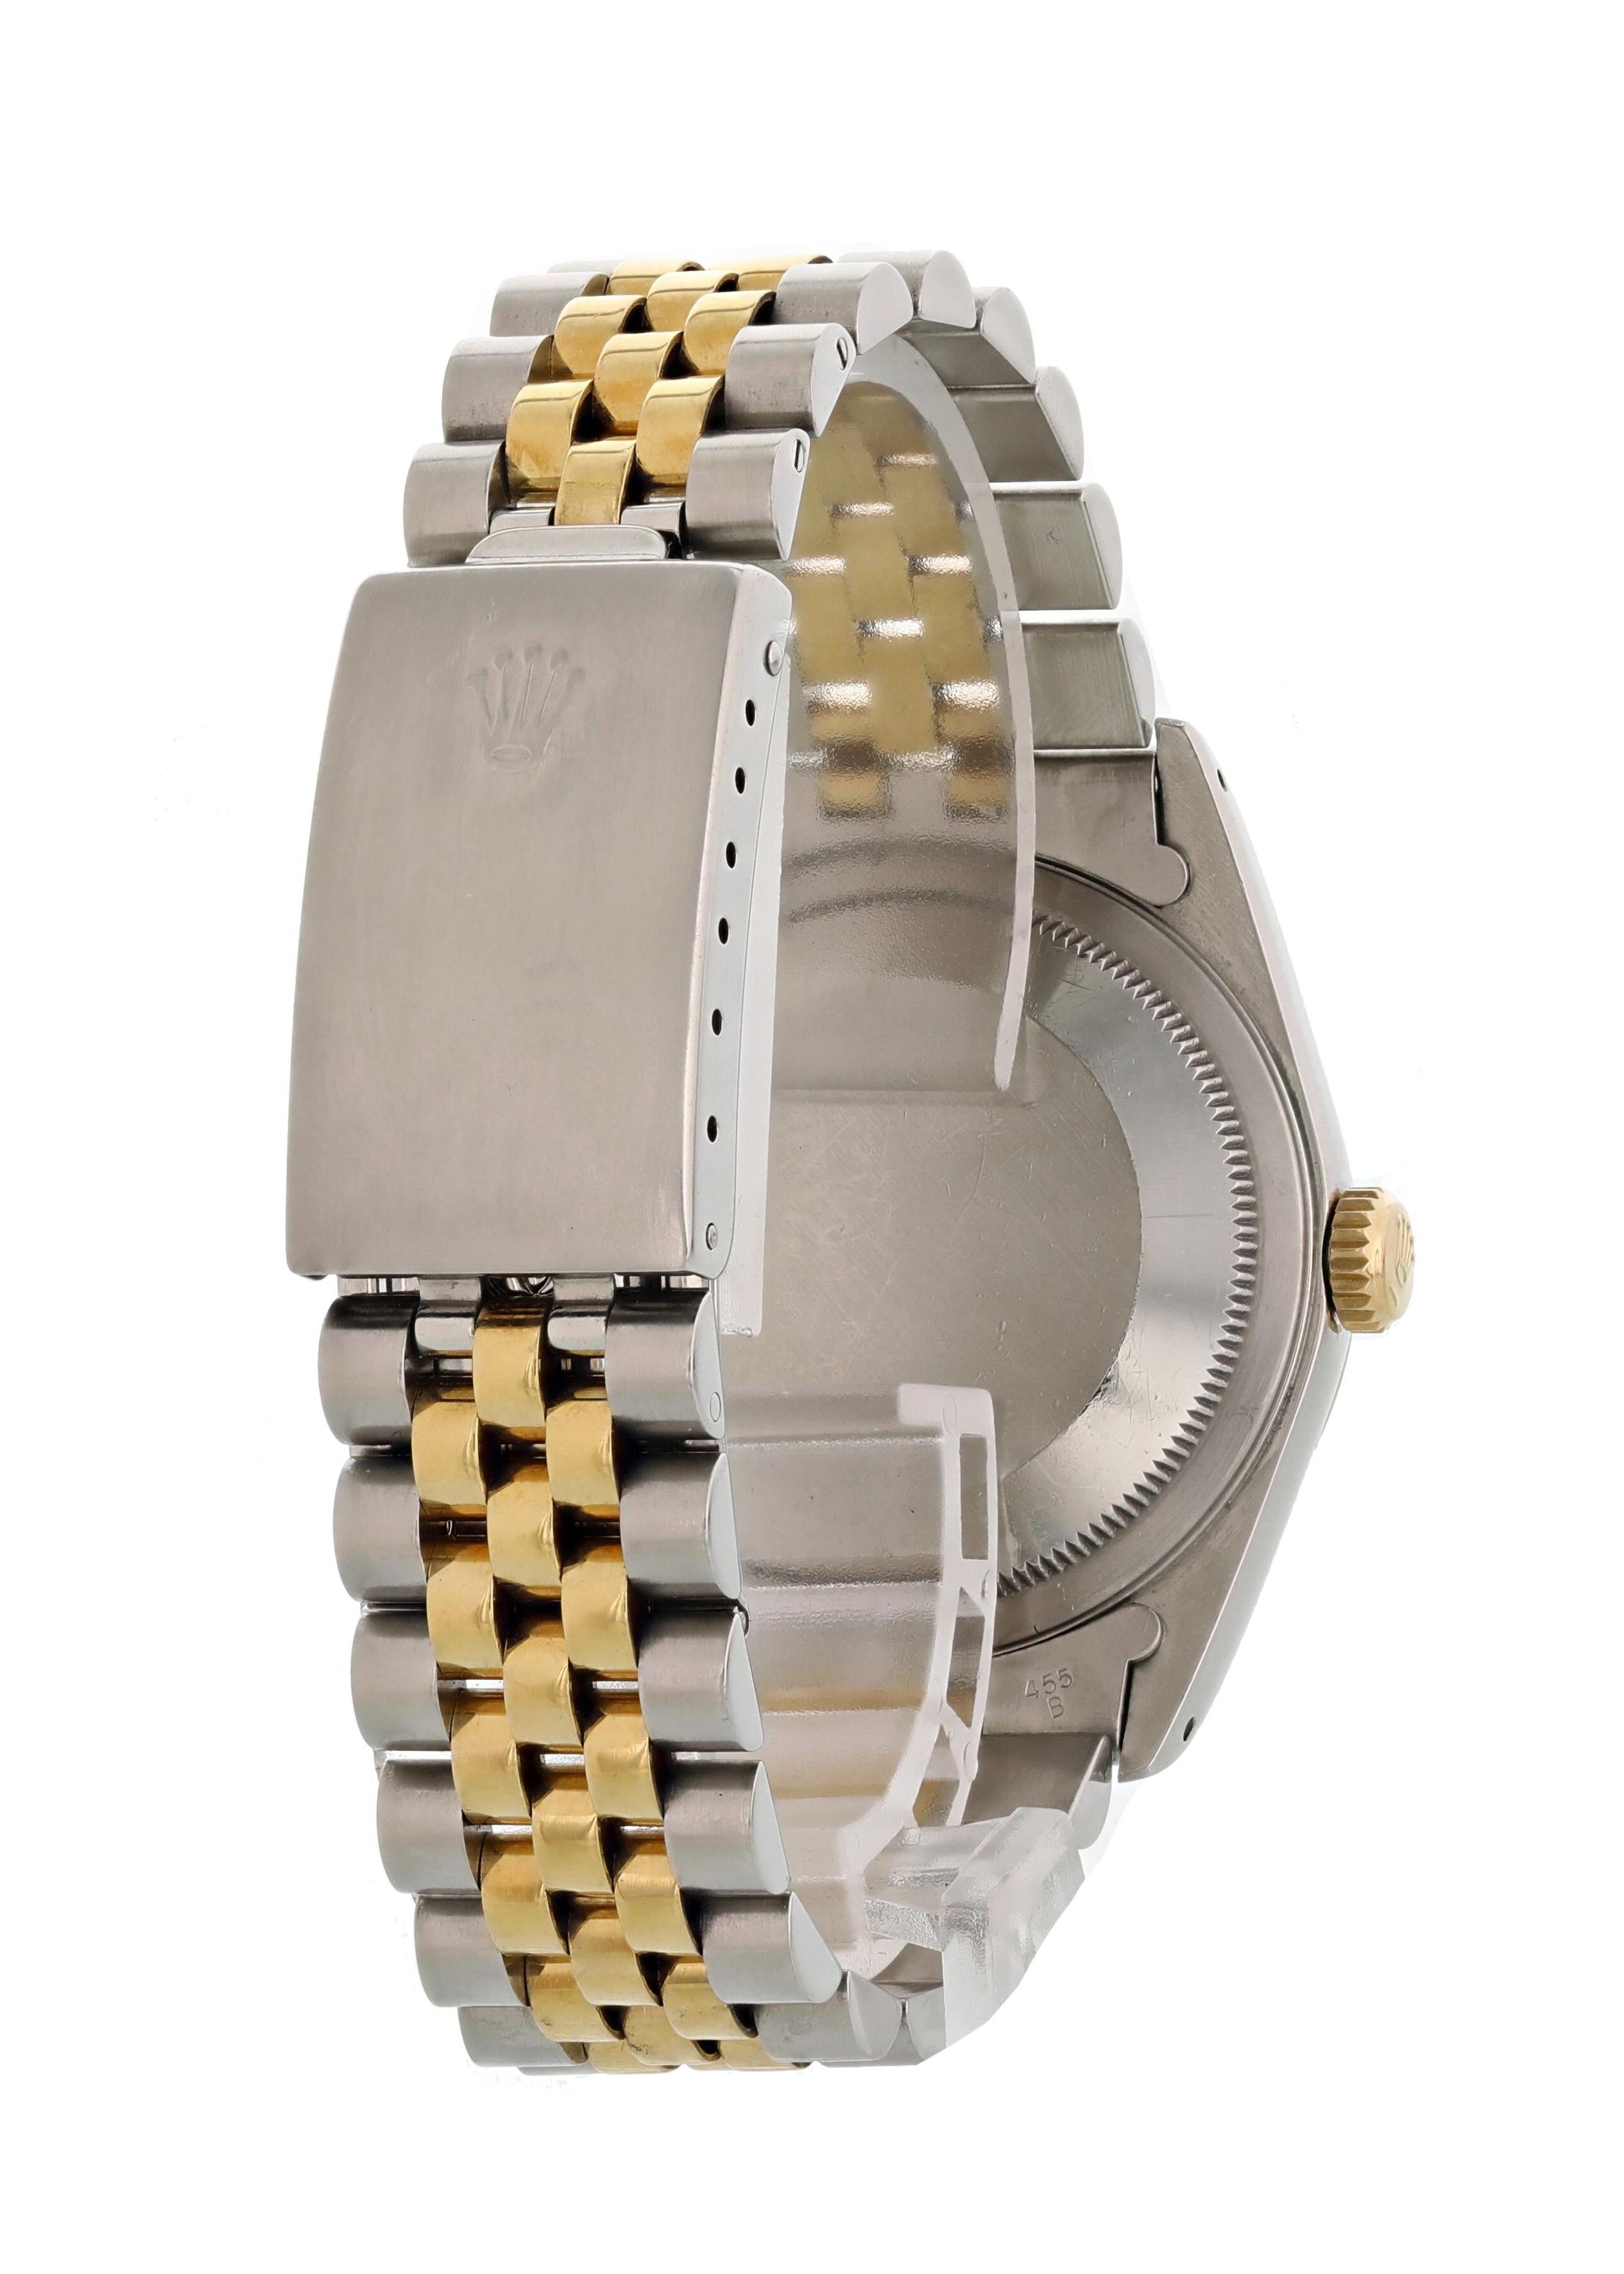 Rolex Oyster Perpetual Datejust 16233 Pyramid Dial Men's Watch at ...